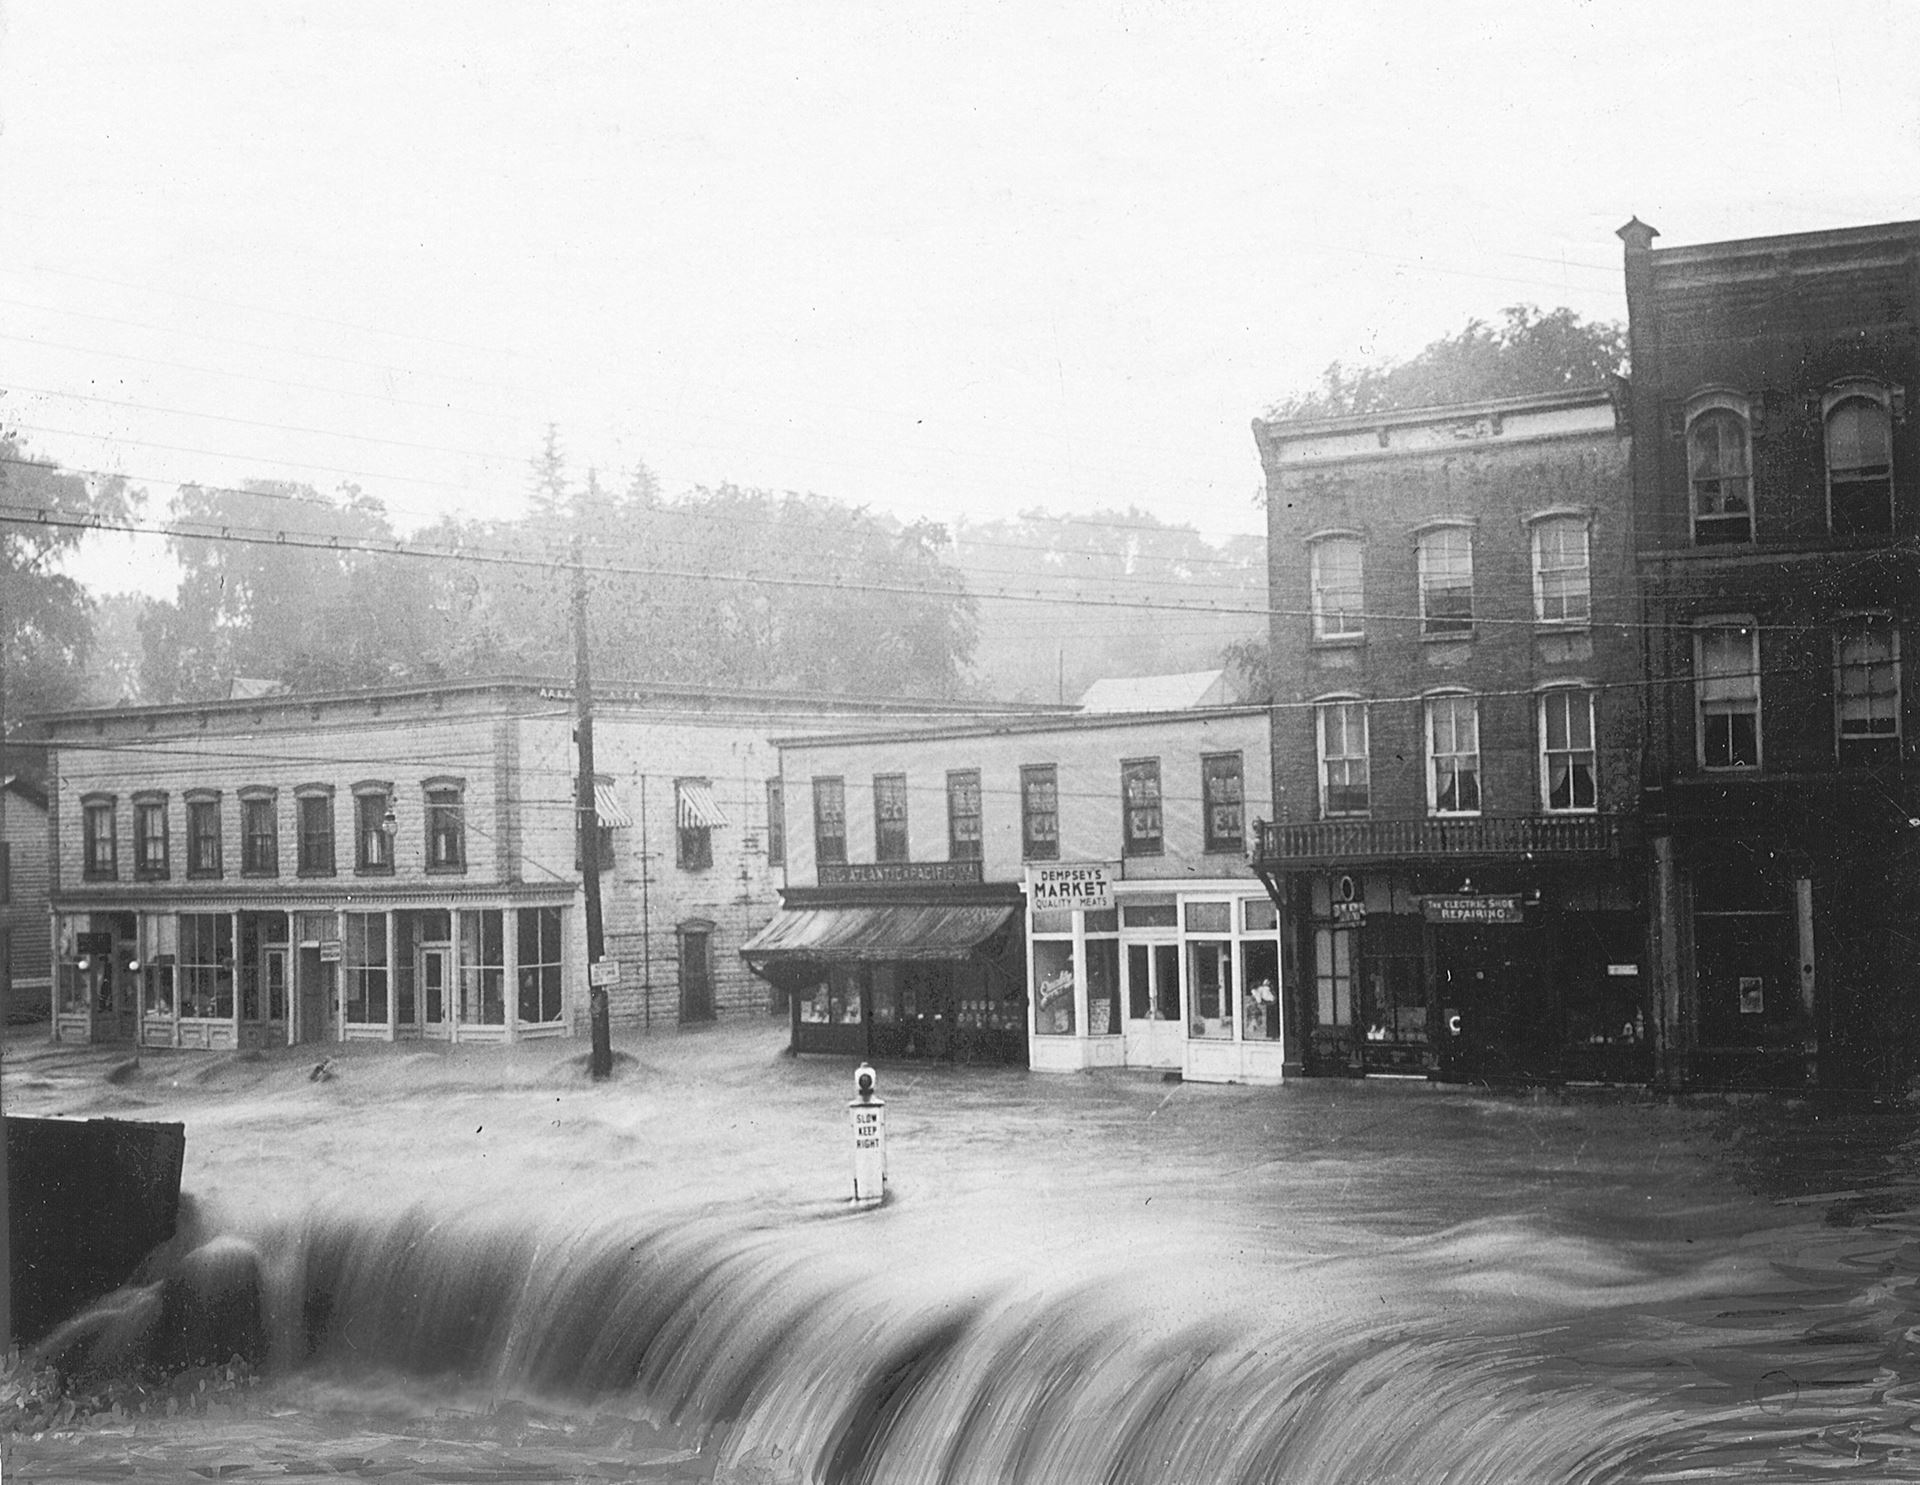 Image of a flooded street and storefronts